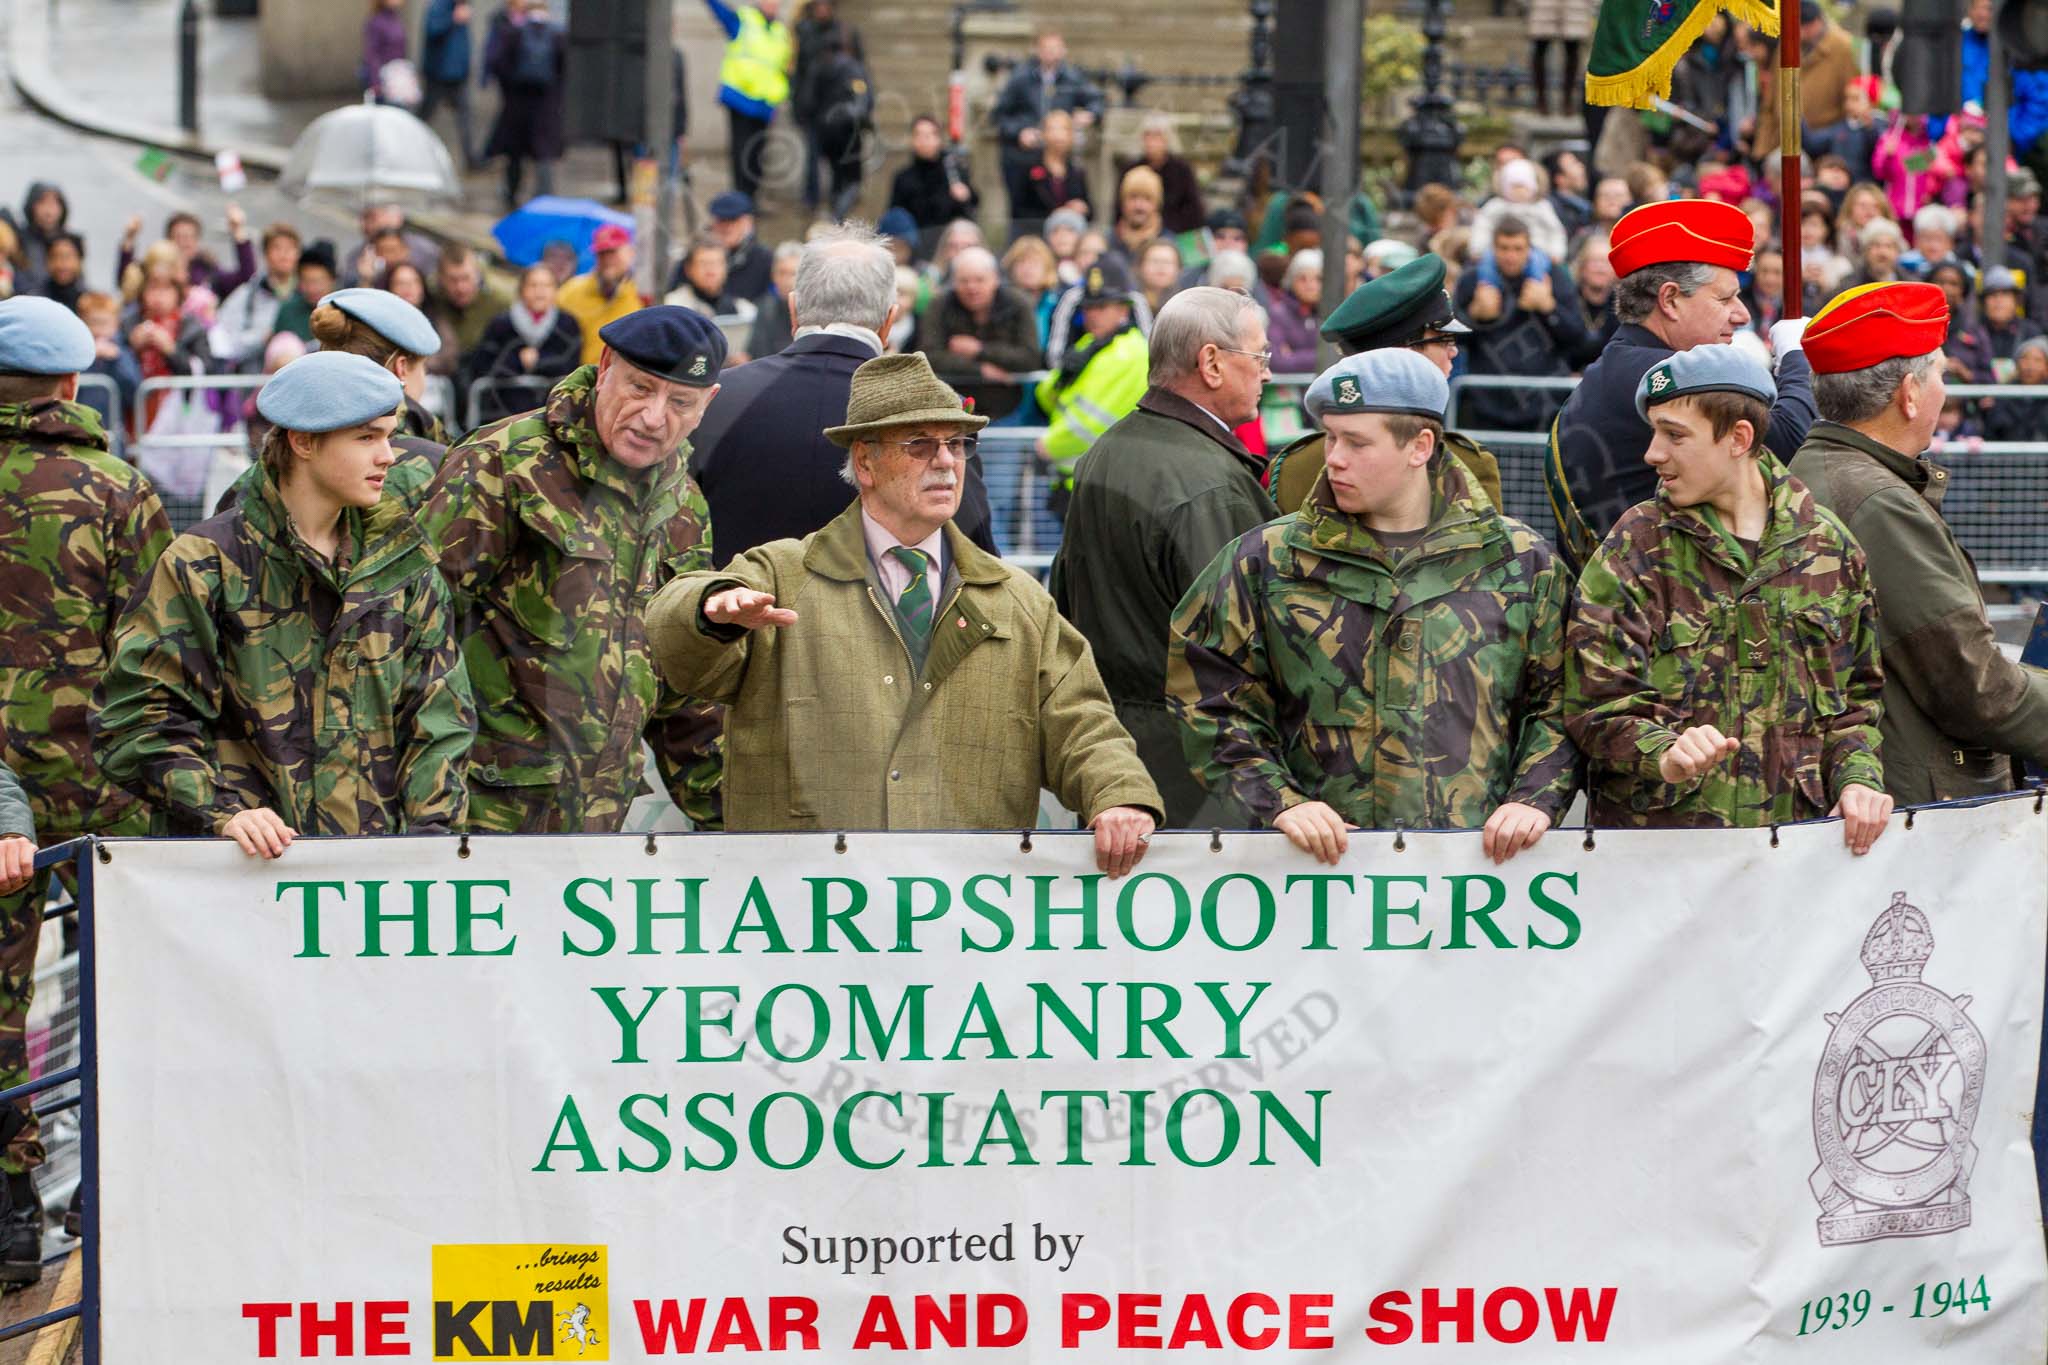 Lord Mayor's Show 2012: Entry 75 - Royal Yeomanry..
Press stand opposite Mansion House, City of London,
London,
Greater London,
United Kingdom,
on 10 November 2012 at 11:33, image #949